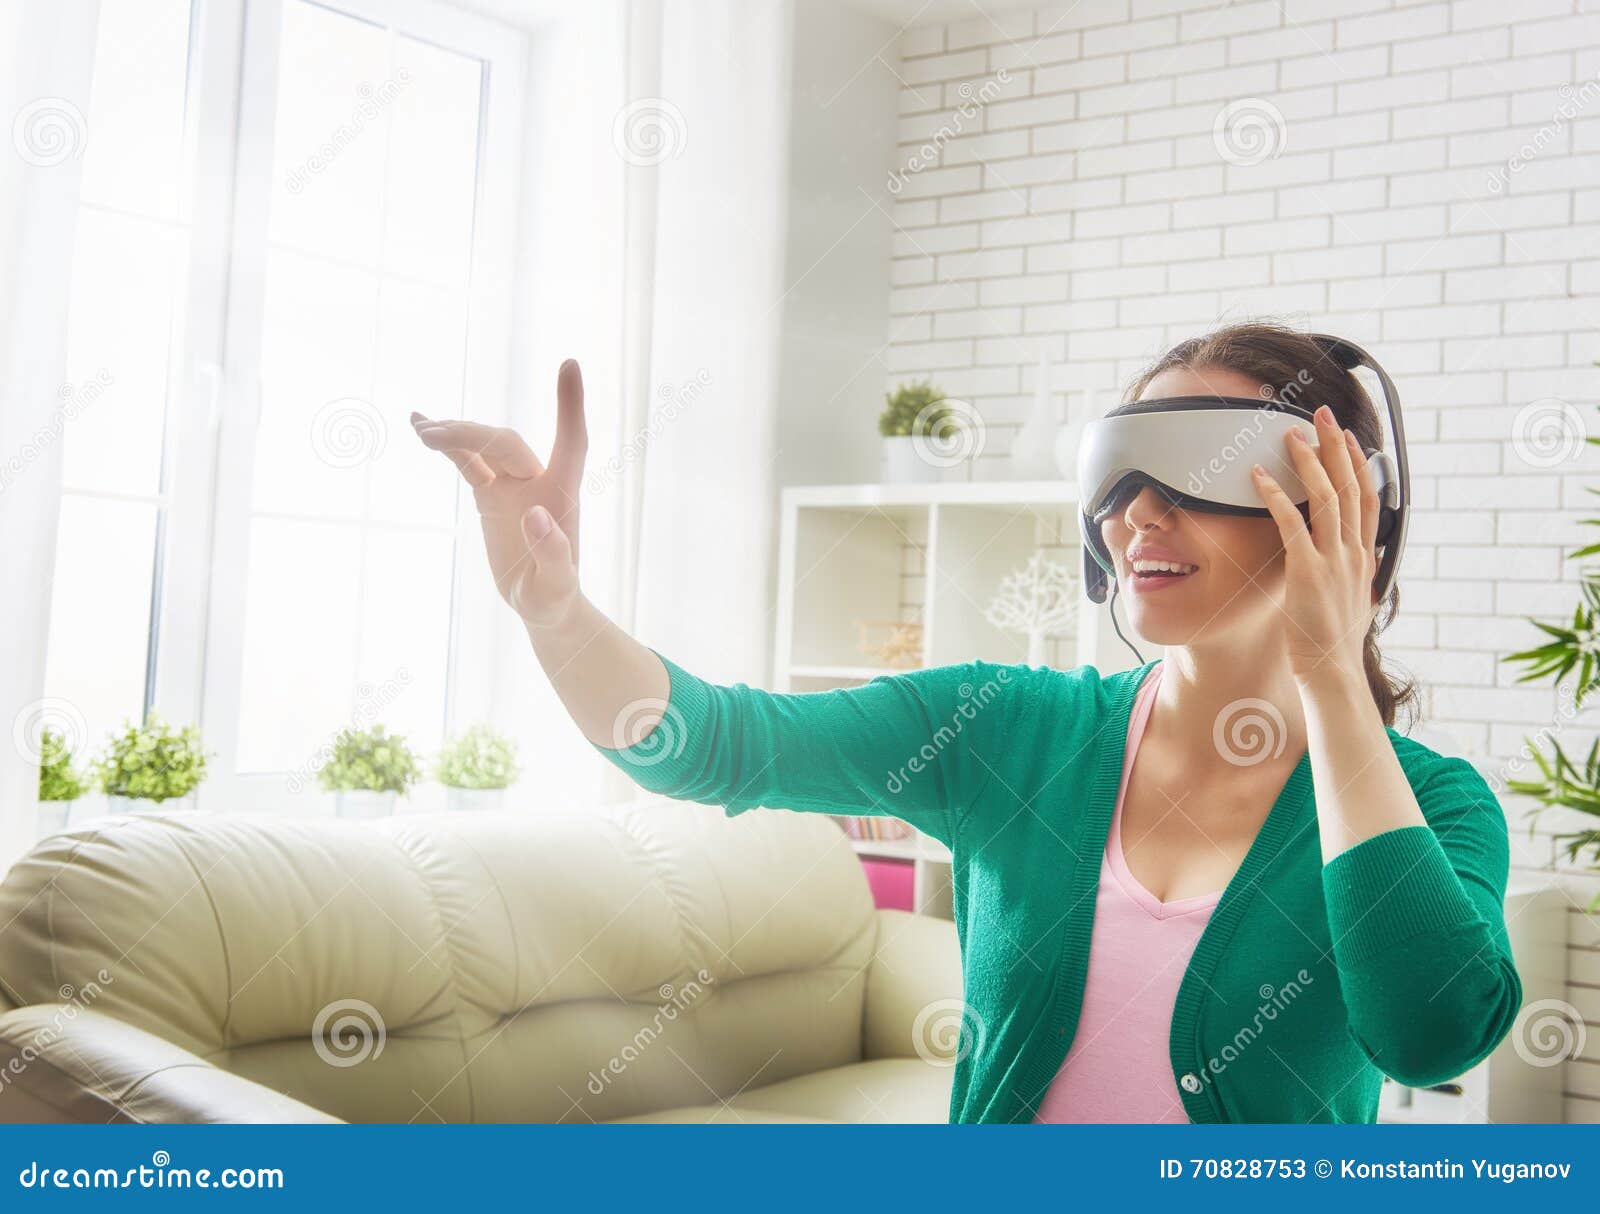 woman in virtual reality glasses.